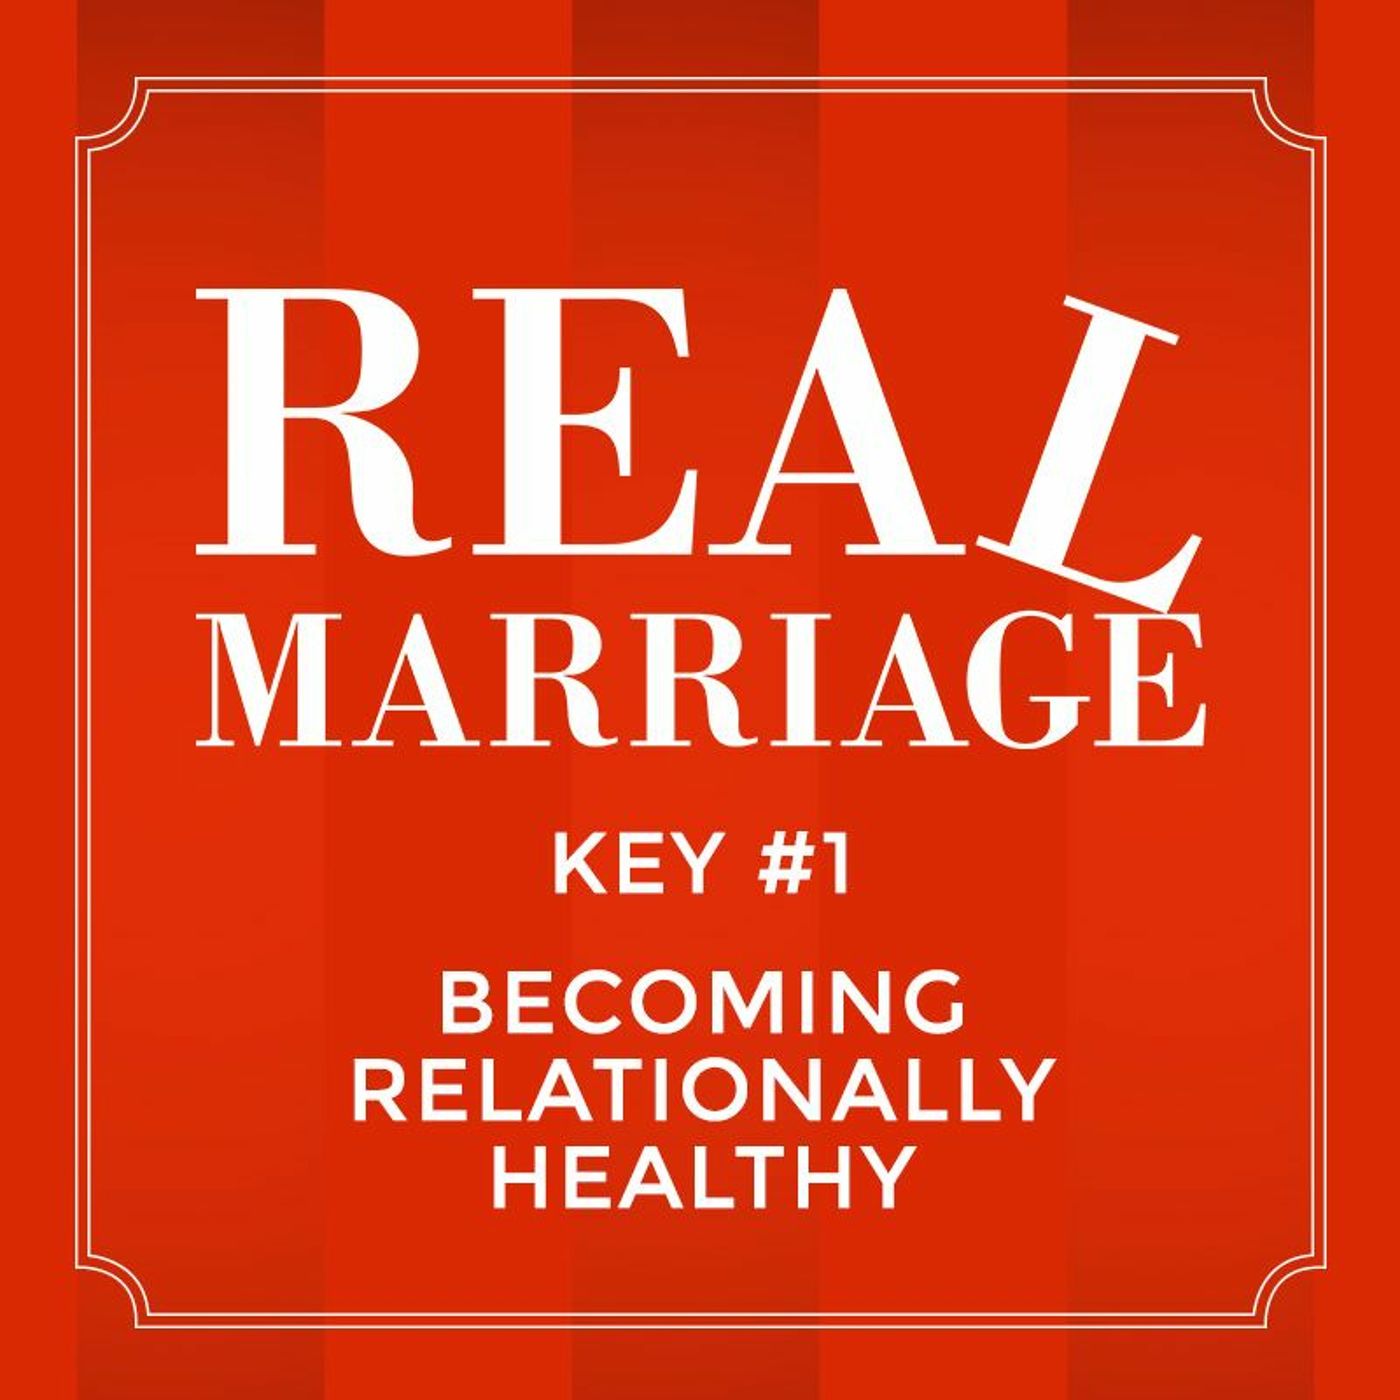 Real Marriage - Key #1 Becoming Relationally Healthy